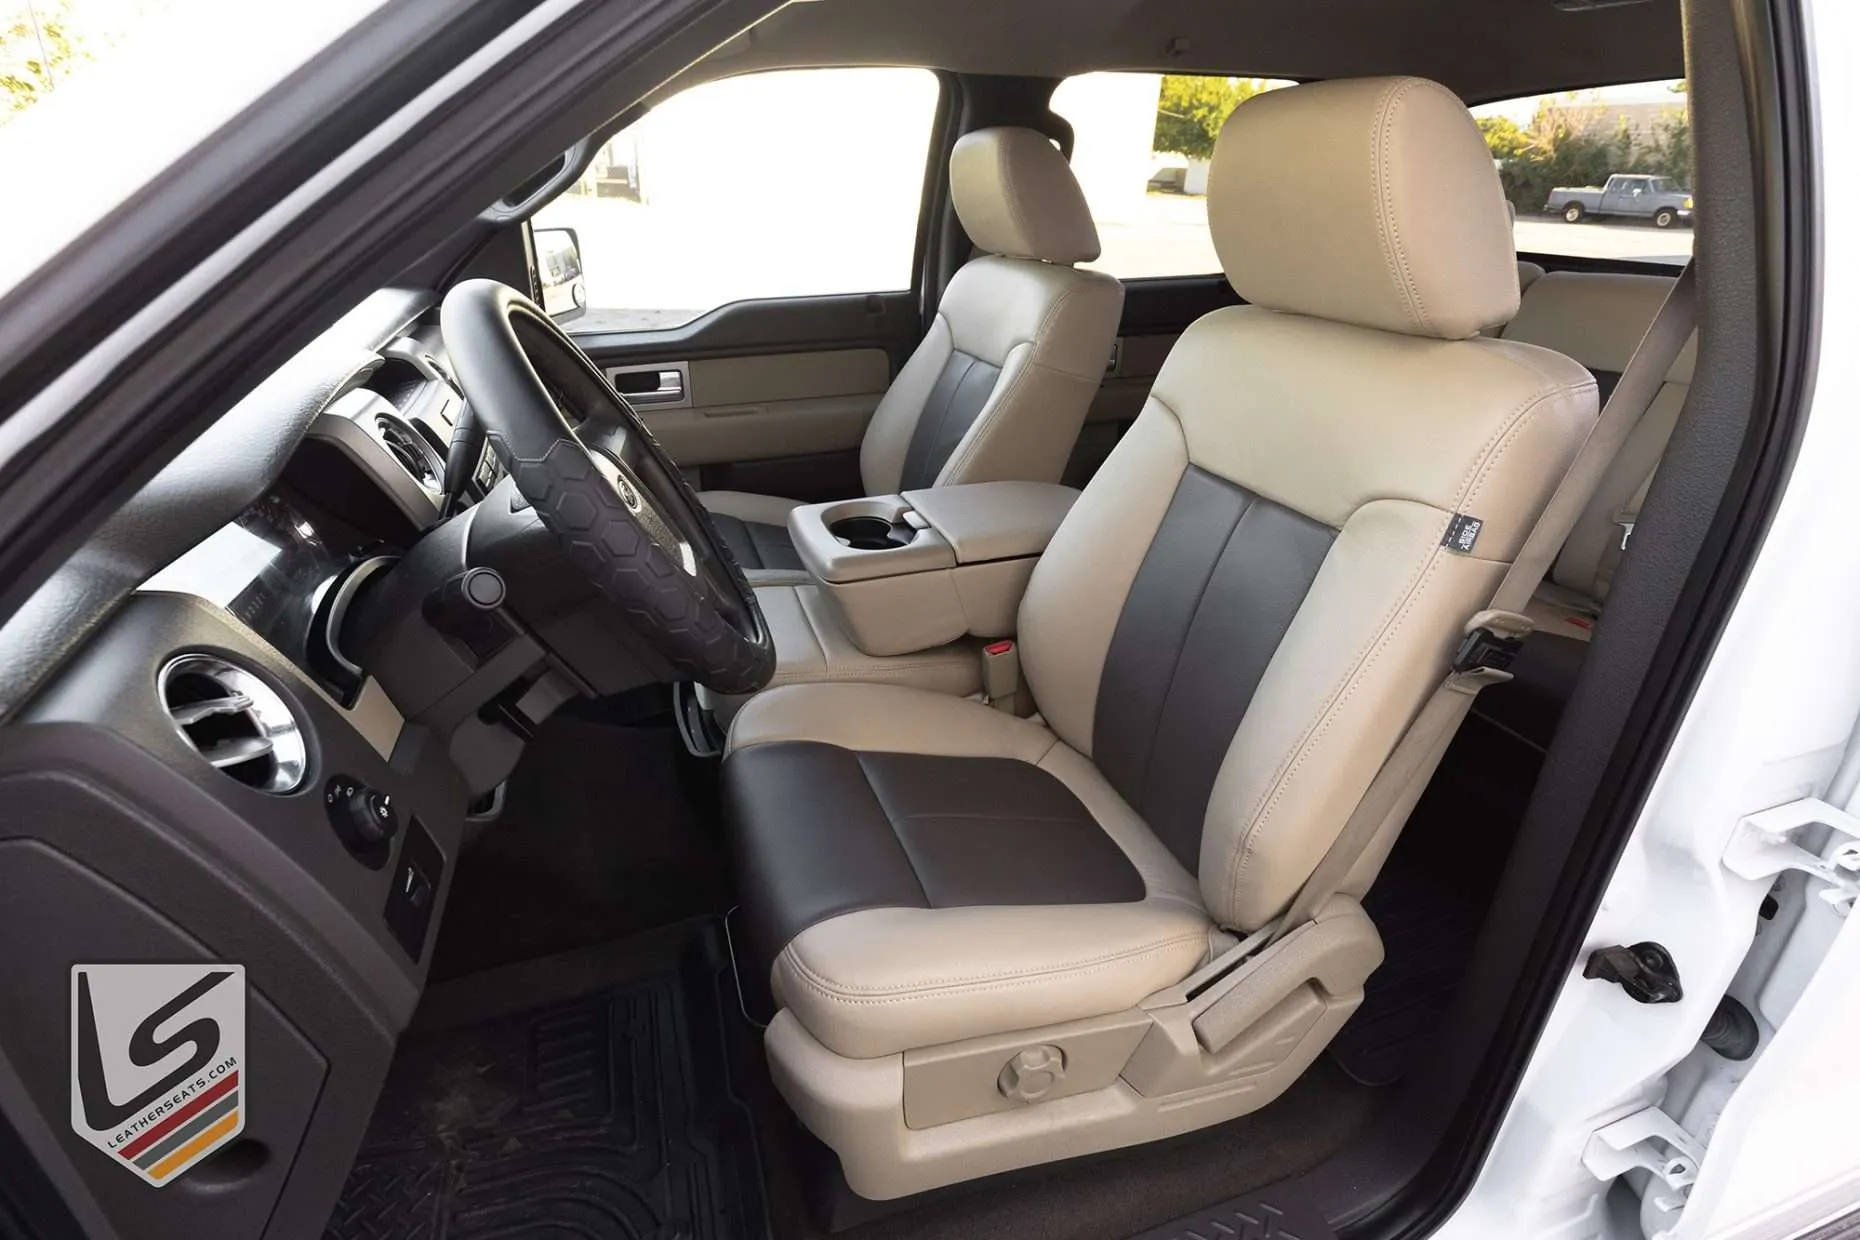 Ford F-150 SuperCrew XLT with custom Sandstone andJava leather seats - front driver seat